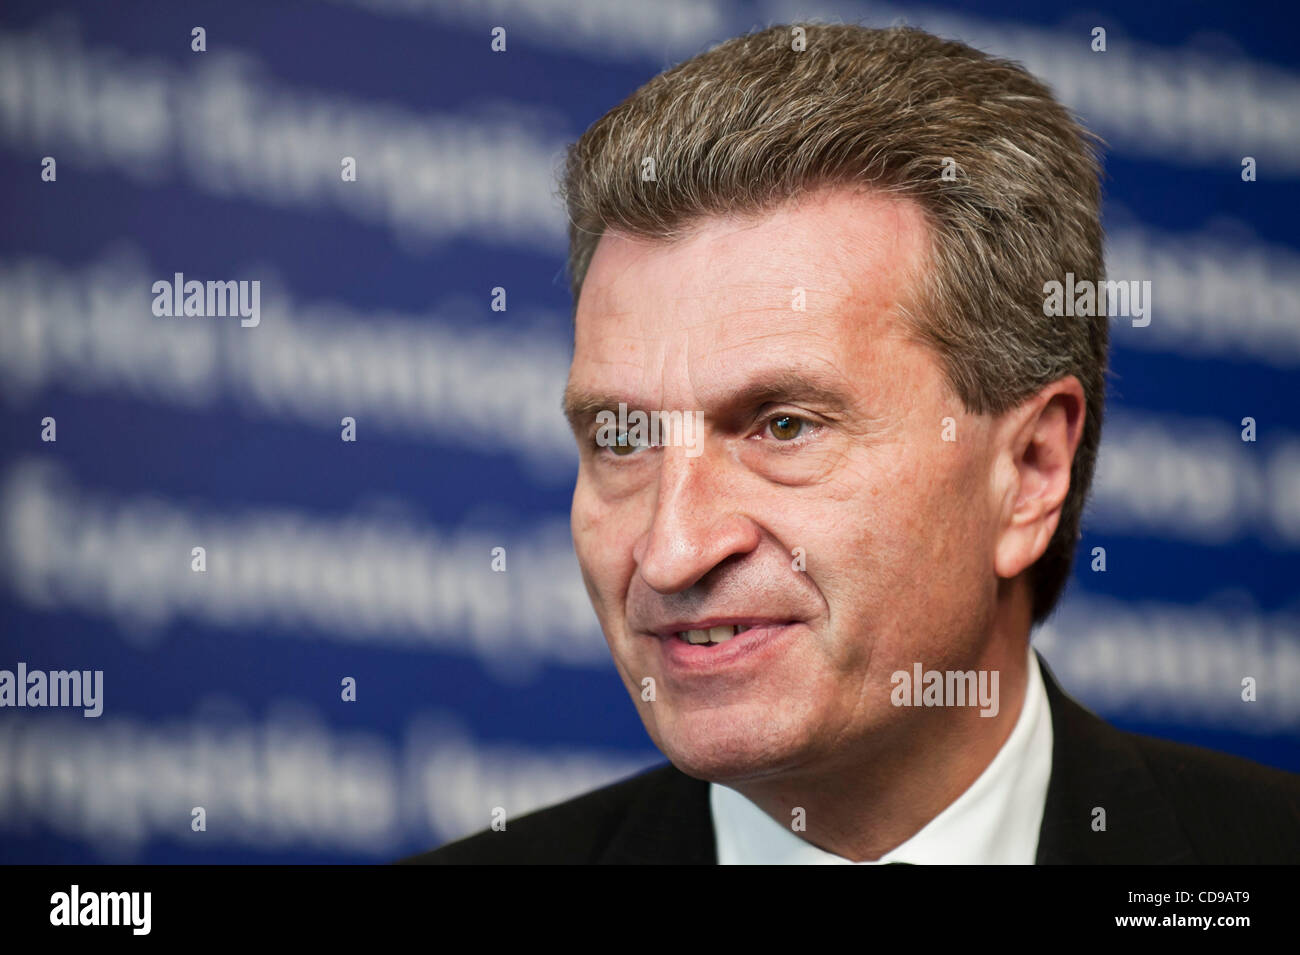 June 28, 2010 - Brussels, BXL, Belgium -  EU Commissioner for Energy Guenther Oettinger during a media conference at EU headquarters  in  Brussels, Belgium on 2010-06-28   The head of OPEC said on Monday he hopes the U.S. government will re-examine President Barack Obama's six-month ban on deep-wate Stock Photo